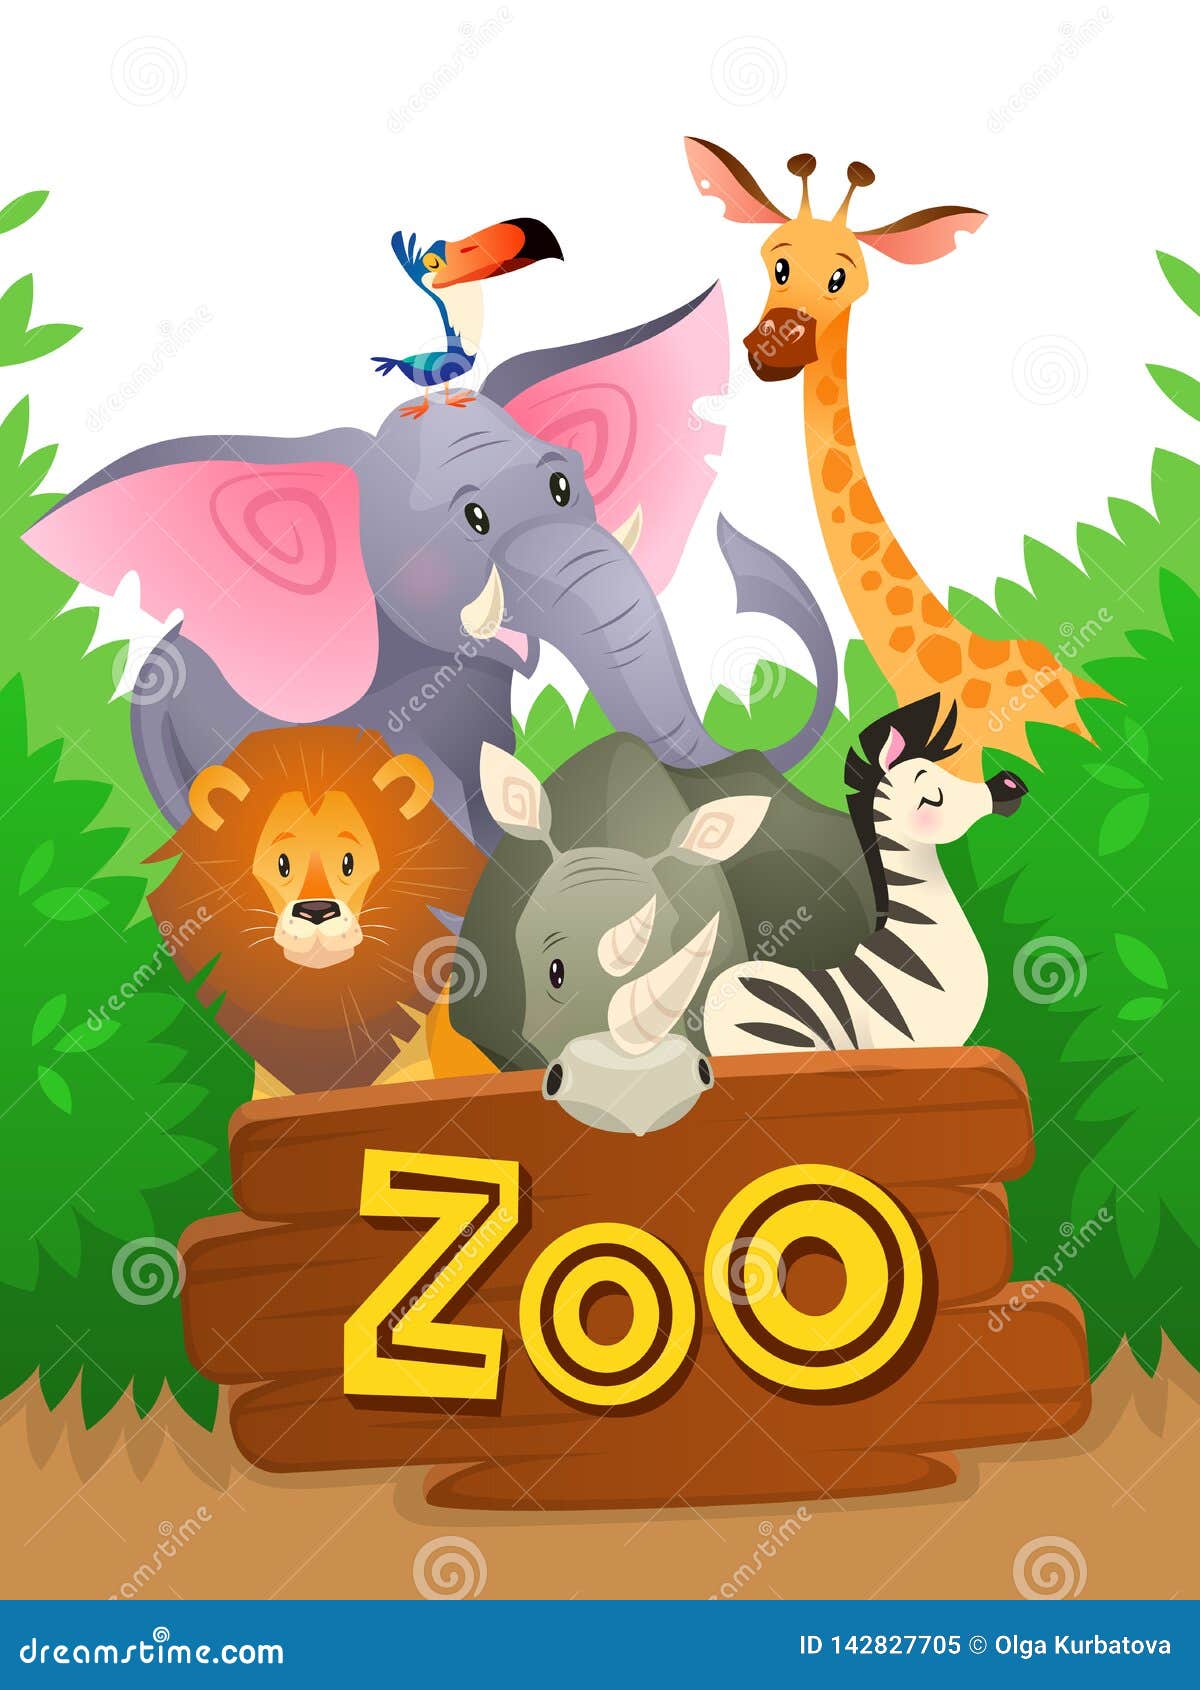 Zoo Animals. African Safari Wildlife Cute Groups Wild Animal Zoo Banner  Jungle Nature Funny Green Landscape Background Stock Vector - Illustration  of landscape, advertising: 142827705